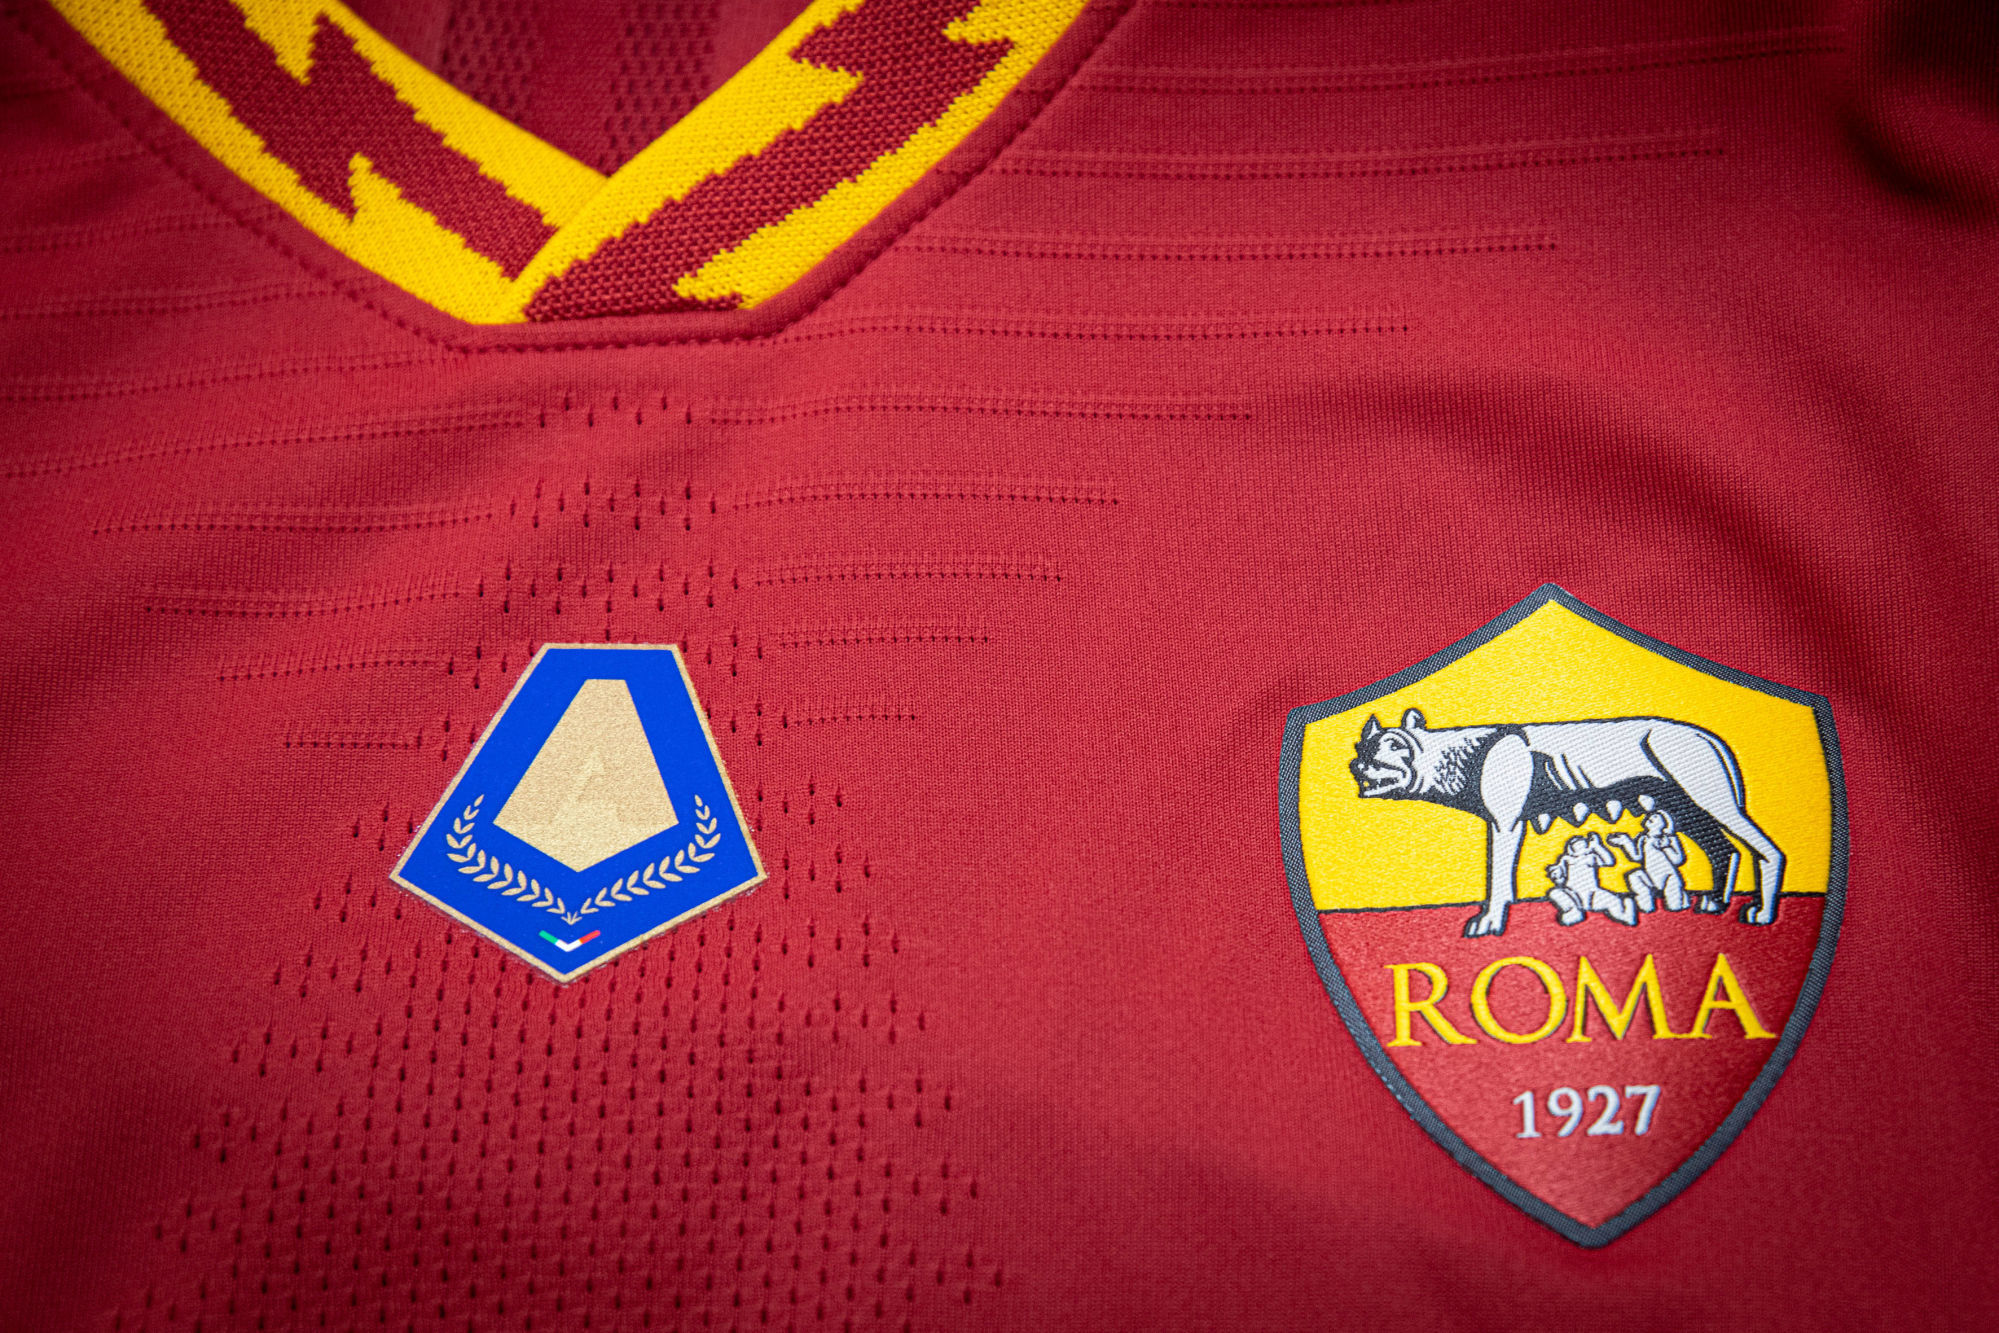 Zaniolo jersey with best young player patch during the Serie A match between Roma and Genoa on August 25th, 2019.
Photo: LaPresse / Icon Sport - ---